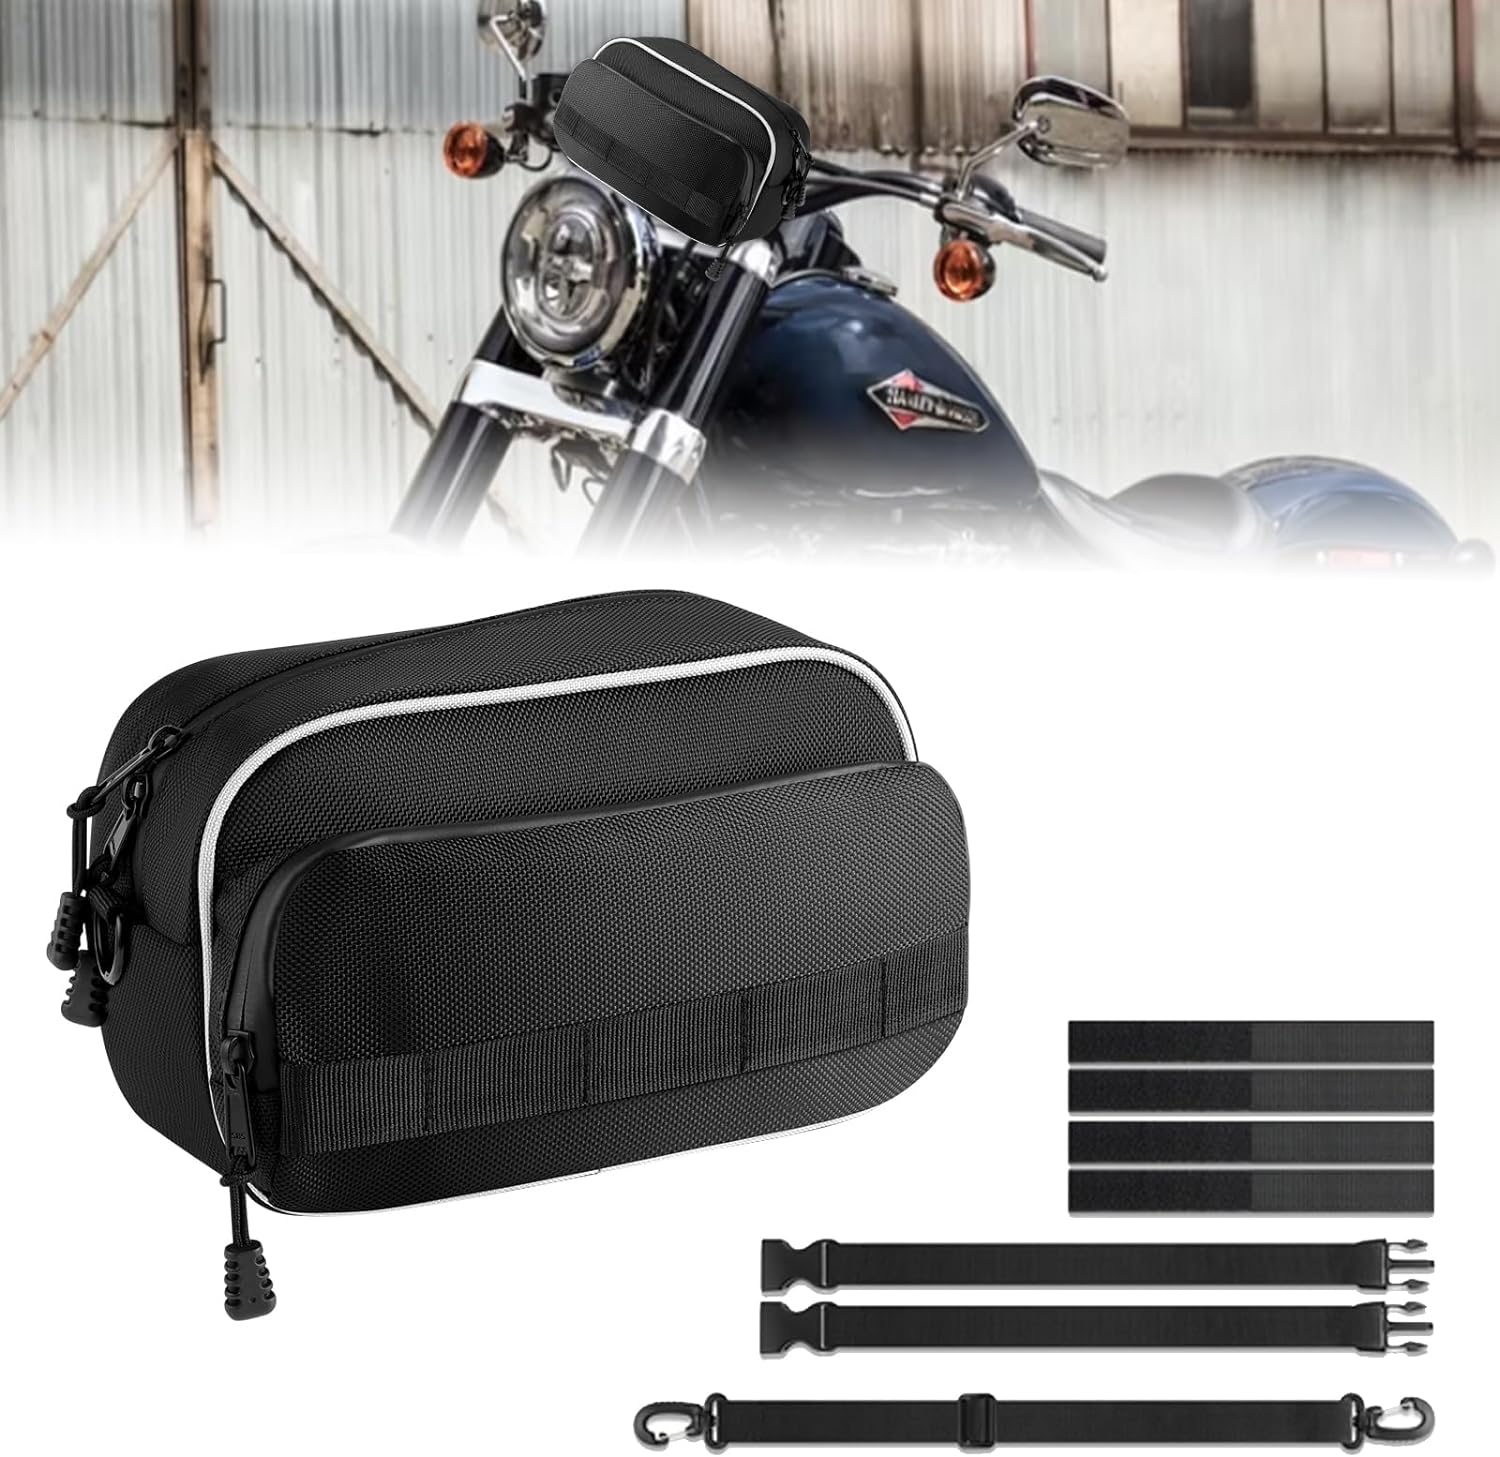 The Motorcycle Sissy Bar Bag Upgraded with Rain Cover, Universal Handle Bar Storage Accessory Tool Bag for Snow Mobiles, Dirt Bike,Motorcycle, Bicycle